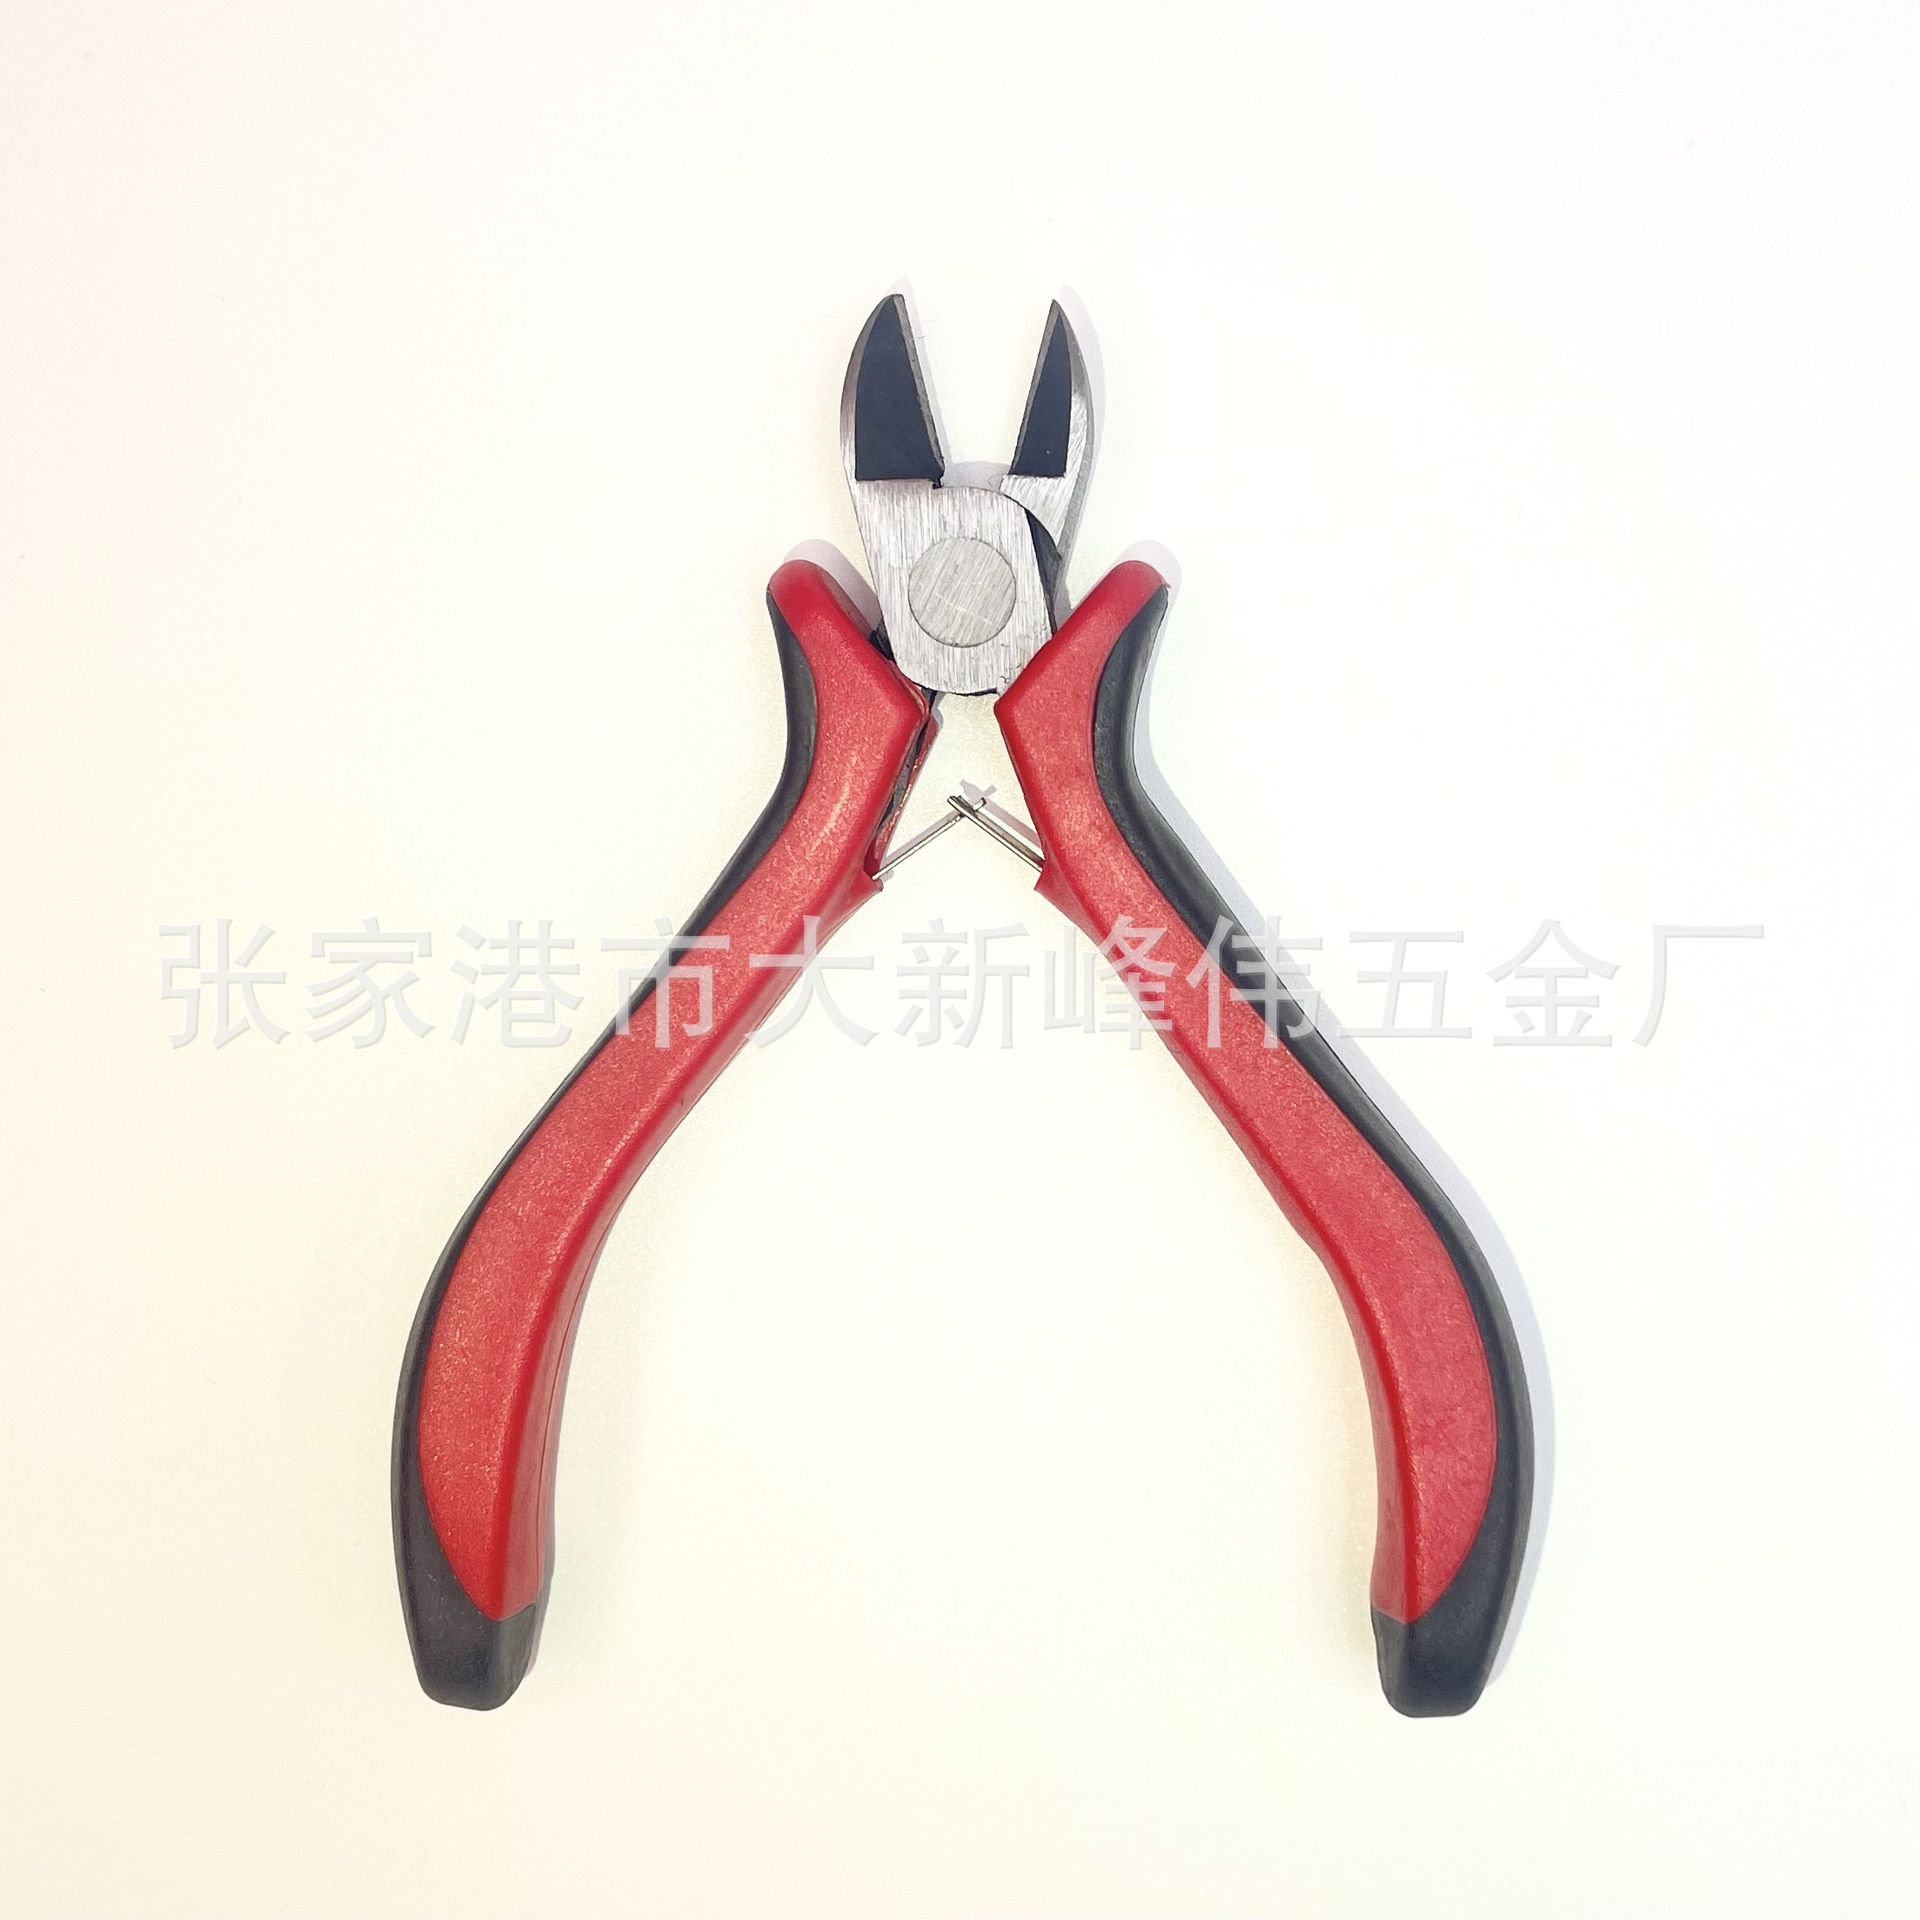 Factory 4.5-Inch Mini Pliers with Handle Pointed Nose Pliers Hair Extension Pliers round Drip Tip Black and Red Handle Slanting Forceps Jewelry